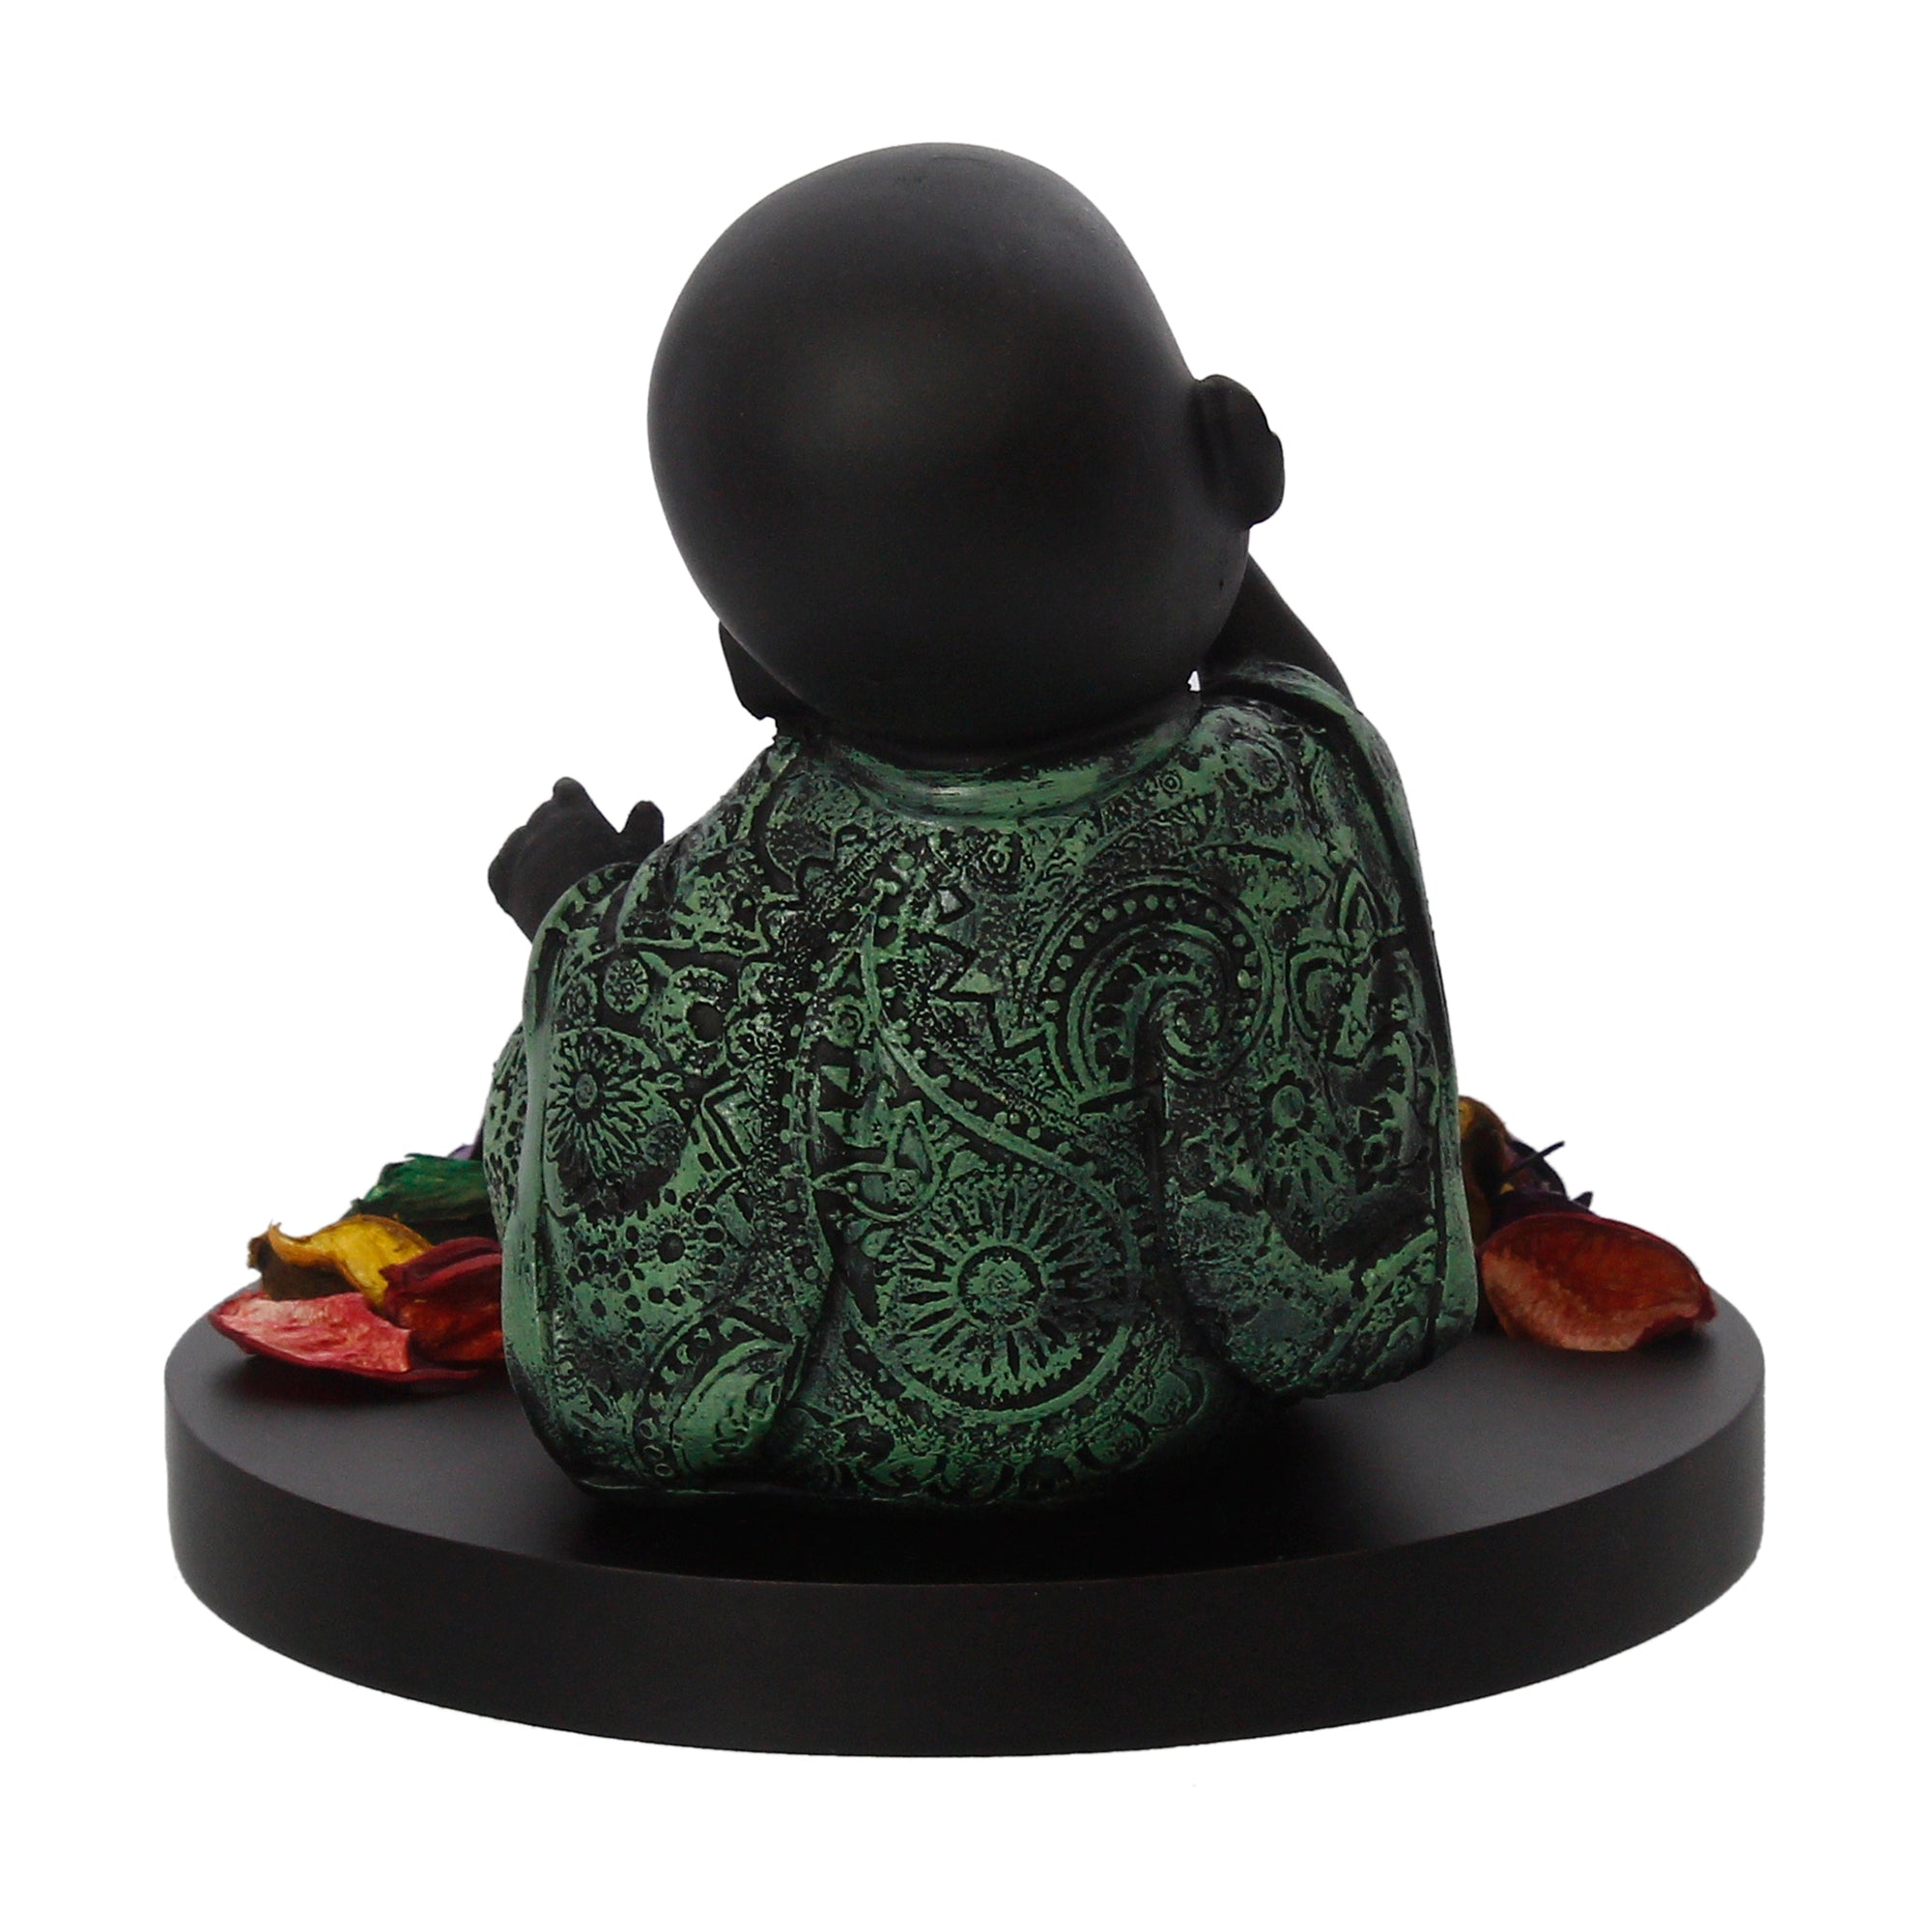 Decorative Smiling Green Monk Buddha with Wooden Base, Fragranced Petals and Tealight 5